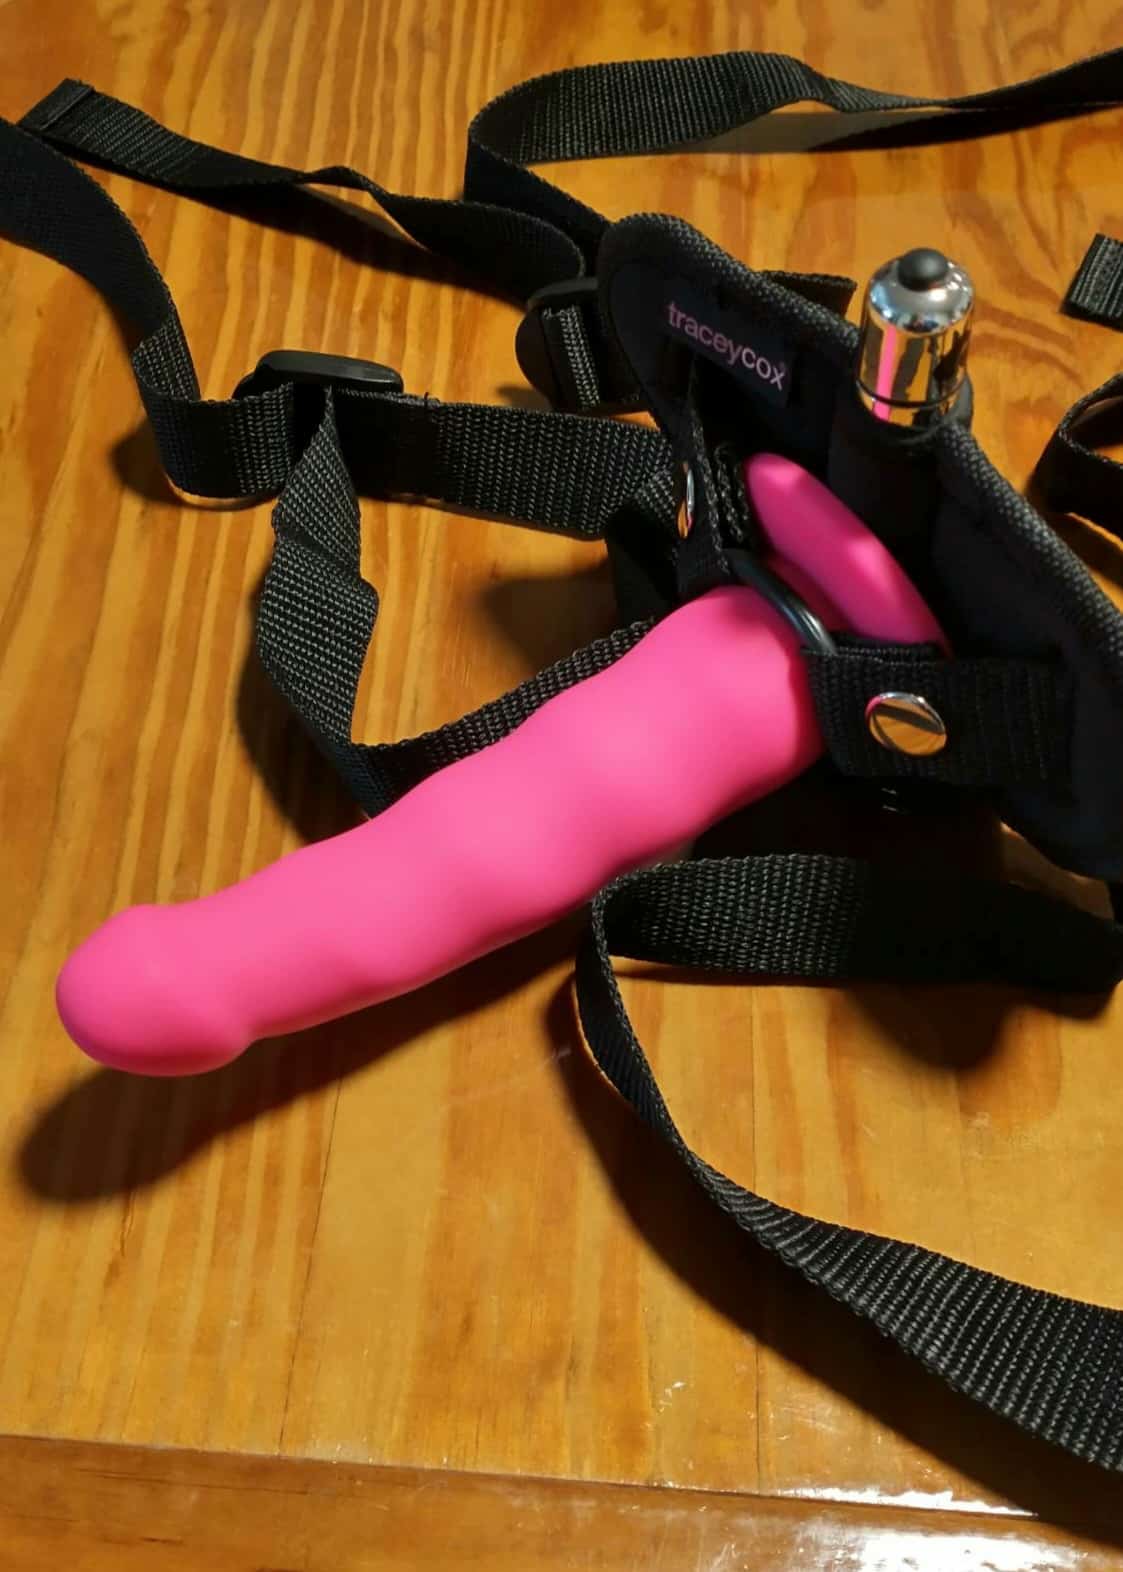 Tracey Cox Supersex Strap-On Pegging Kit (4 Piece). Slide 9